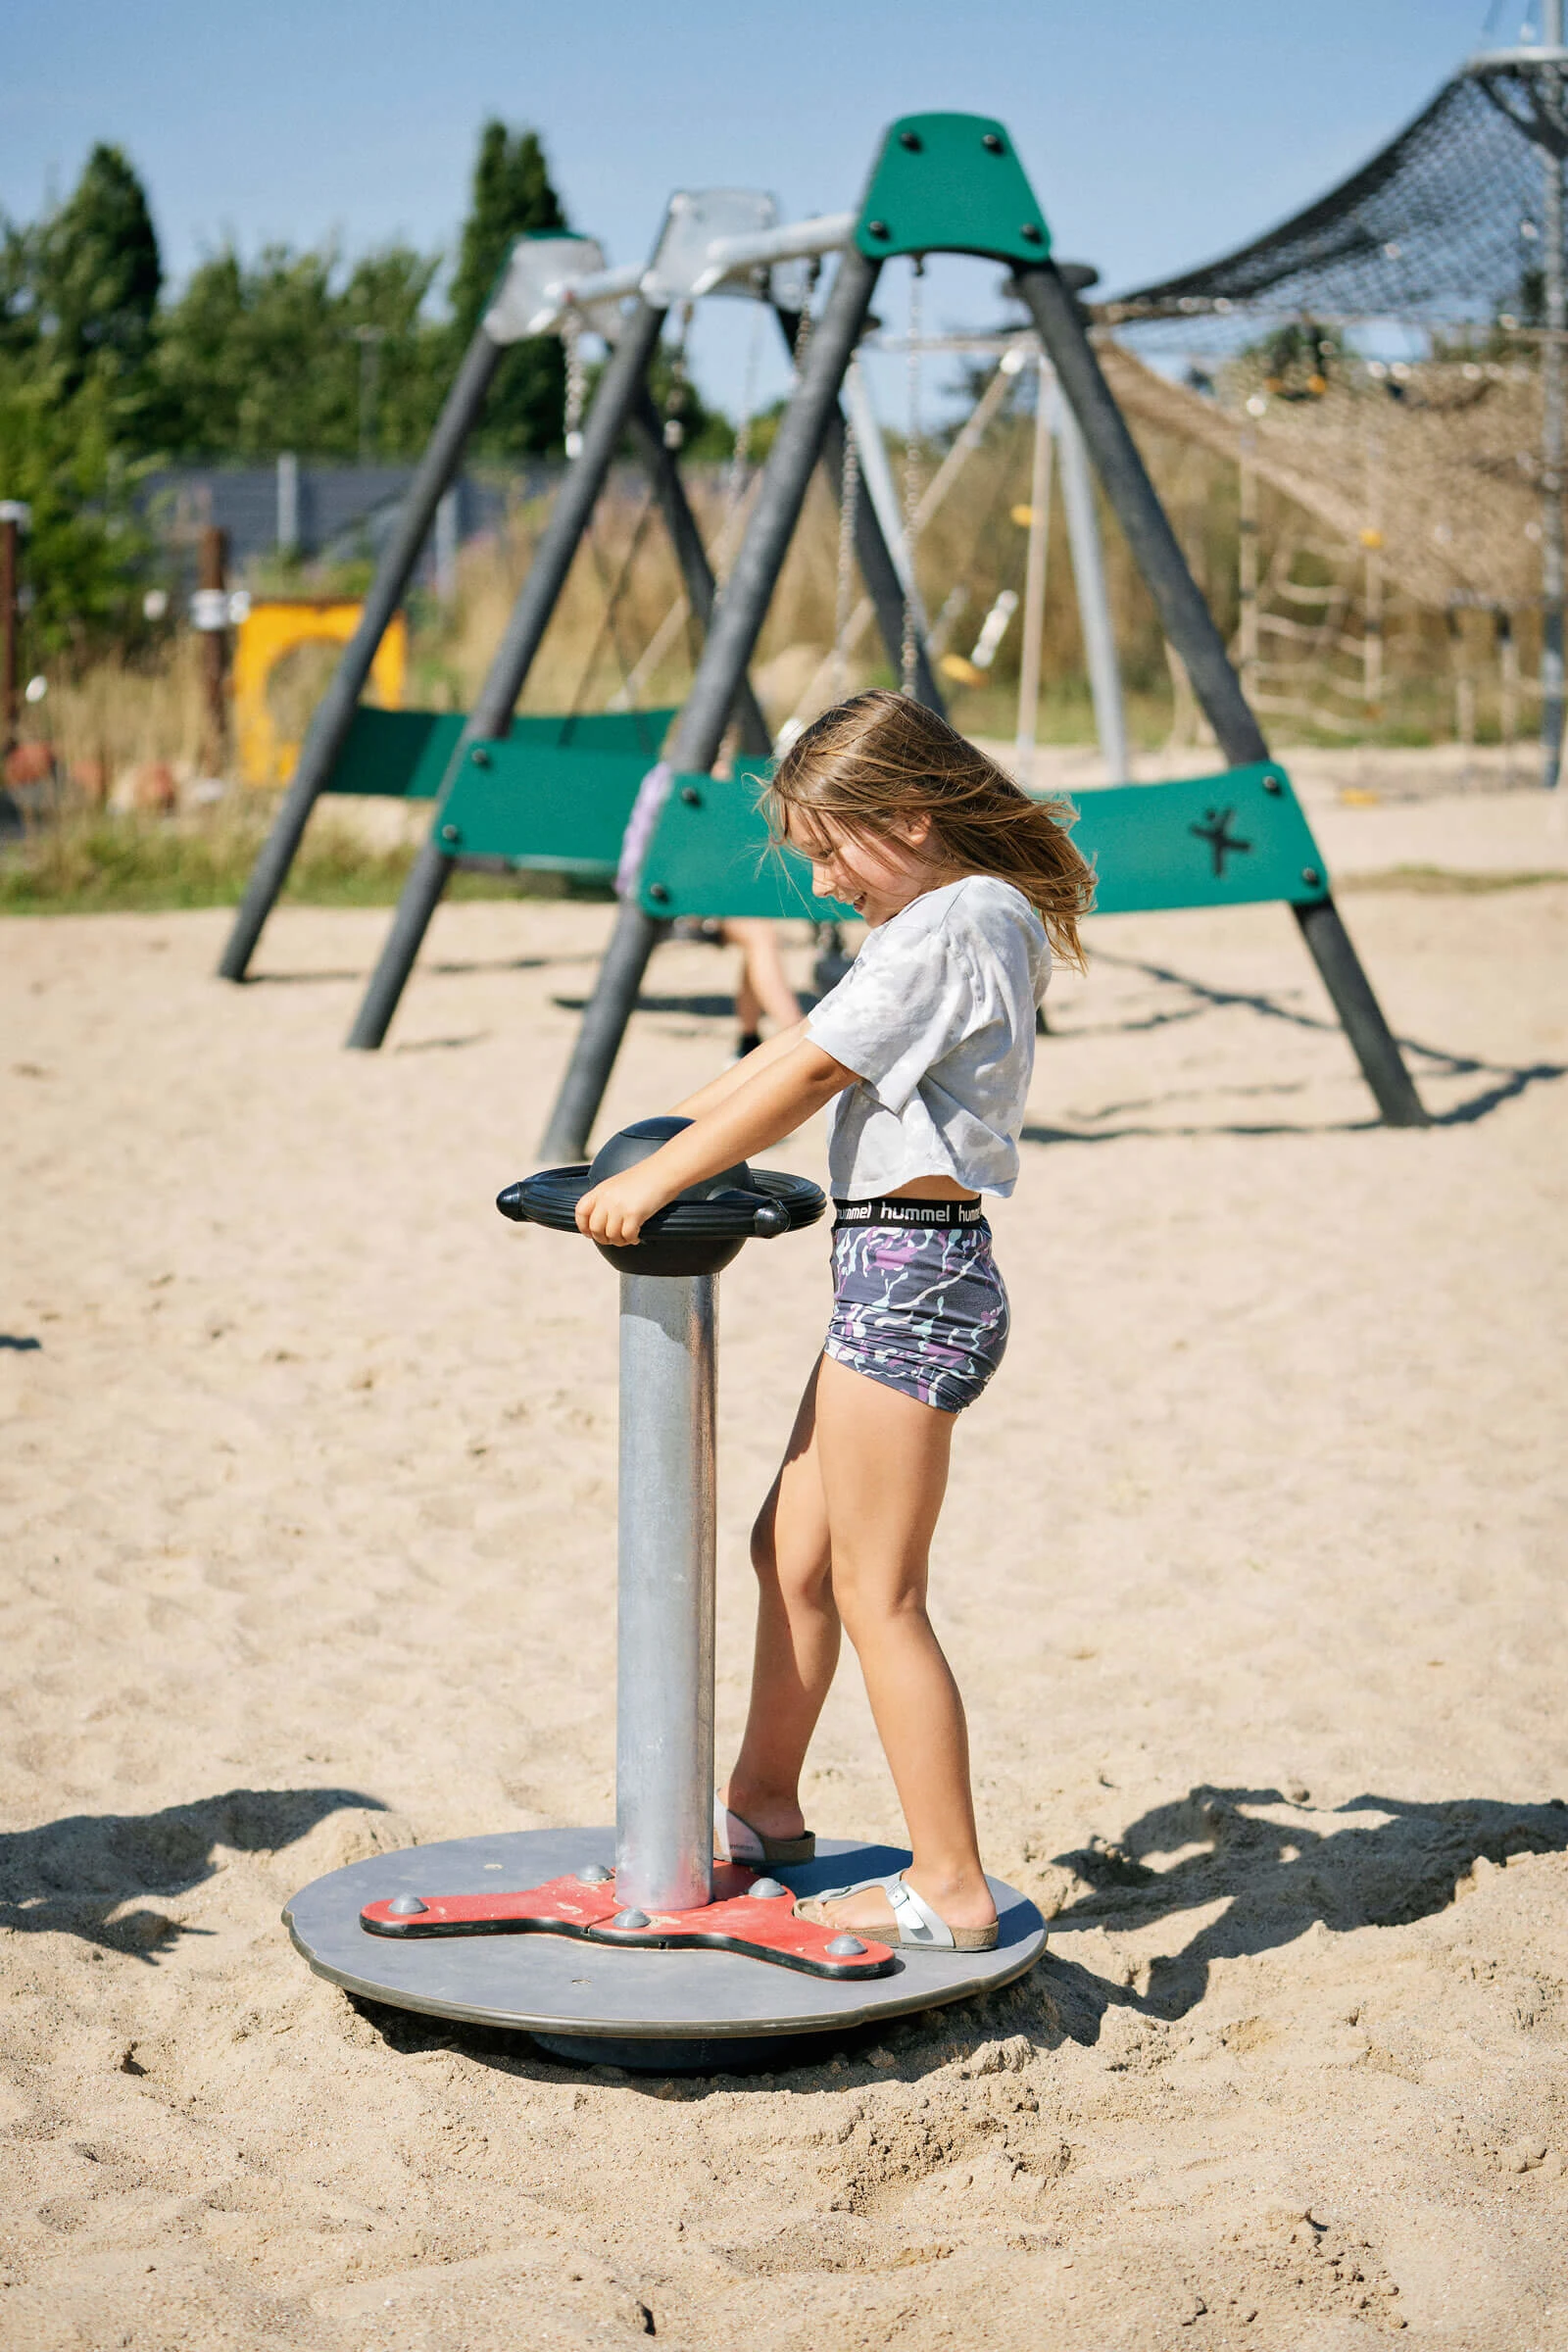 Scooter carousel, 2023 playground product news. 